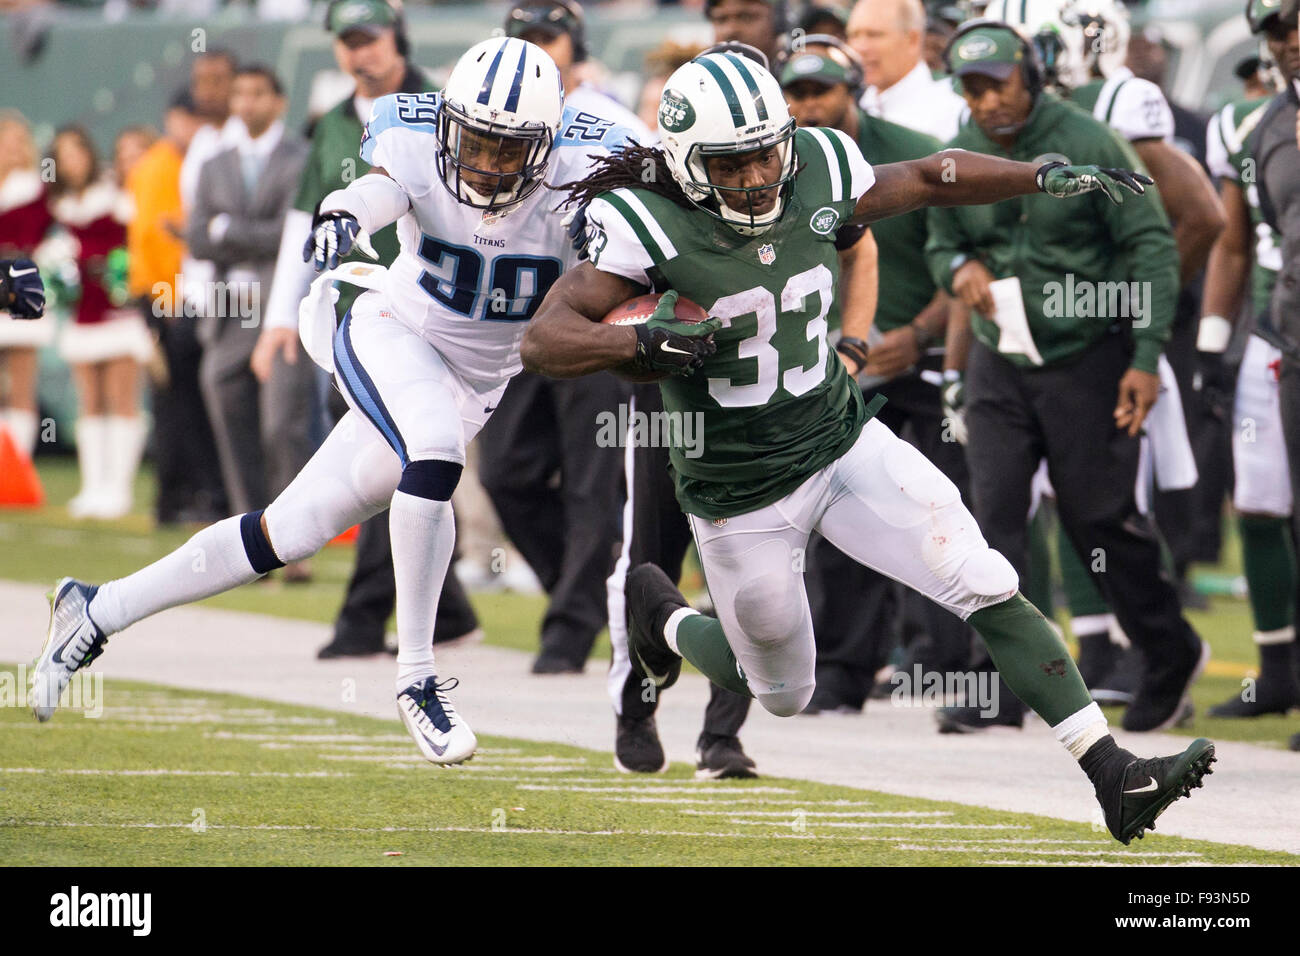 East Rutherford, New Jersey, USA. 13th Dec, 2015. New York Jets running back Chris Ivory (33) runs with the ball away from Tennessee Titans cornerback Perrish Cox (29) during the NFL game between the Tennessee Titans and the New York Jets at MetLife Stadium in East Rutherford, New Jersey. The New York Jets won 30-8. Christopher Szagola/CSM/Alamy Live News Stock Photo